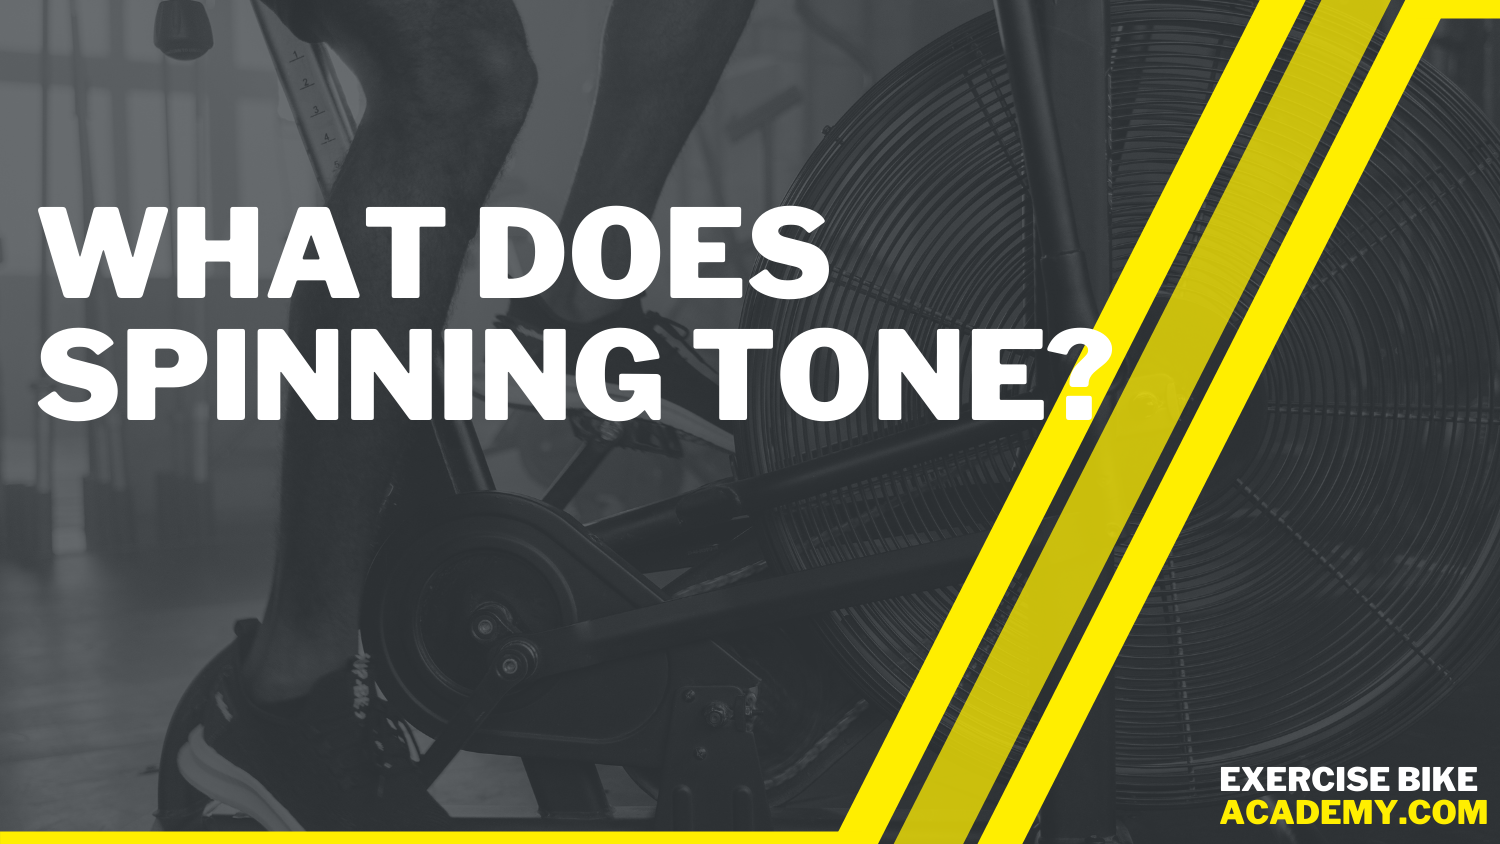 What Does Spinning Tone? Here’s How a Spin Bike Can Help You Get a Full-Body Workout